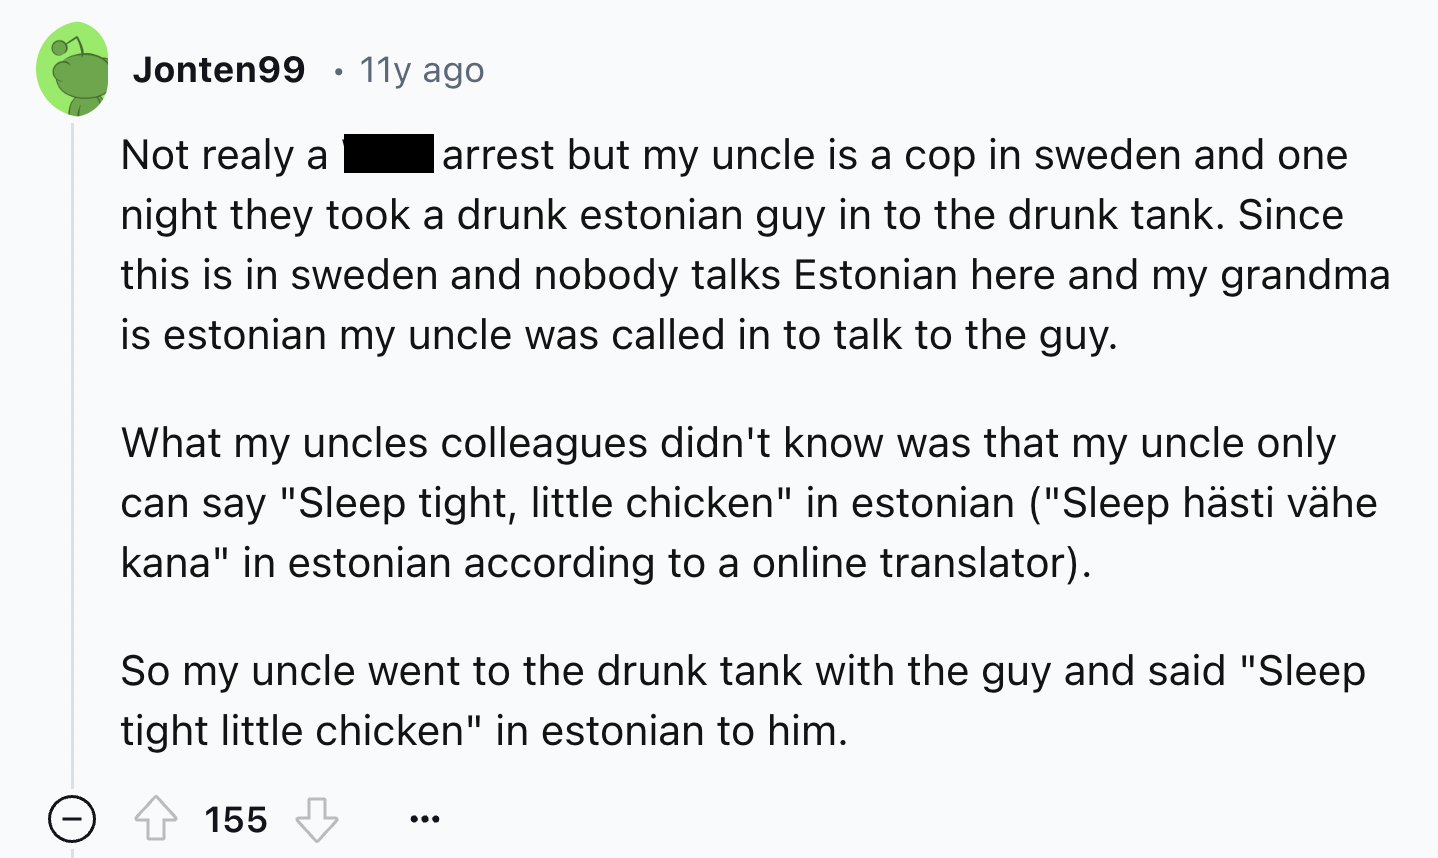 screenshot - Jonten99 11y ago Not realy a arrest but my uncle is a cop in sweden and one night they took a drunk estonian guy in to the drunk tank. Since this is in sweden and nobody talks Estonian here and my grandma is estonian my uncle was called in to